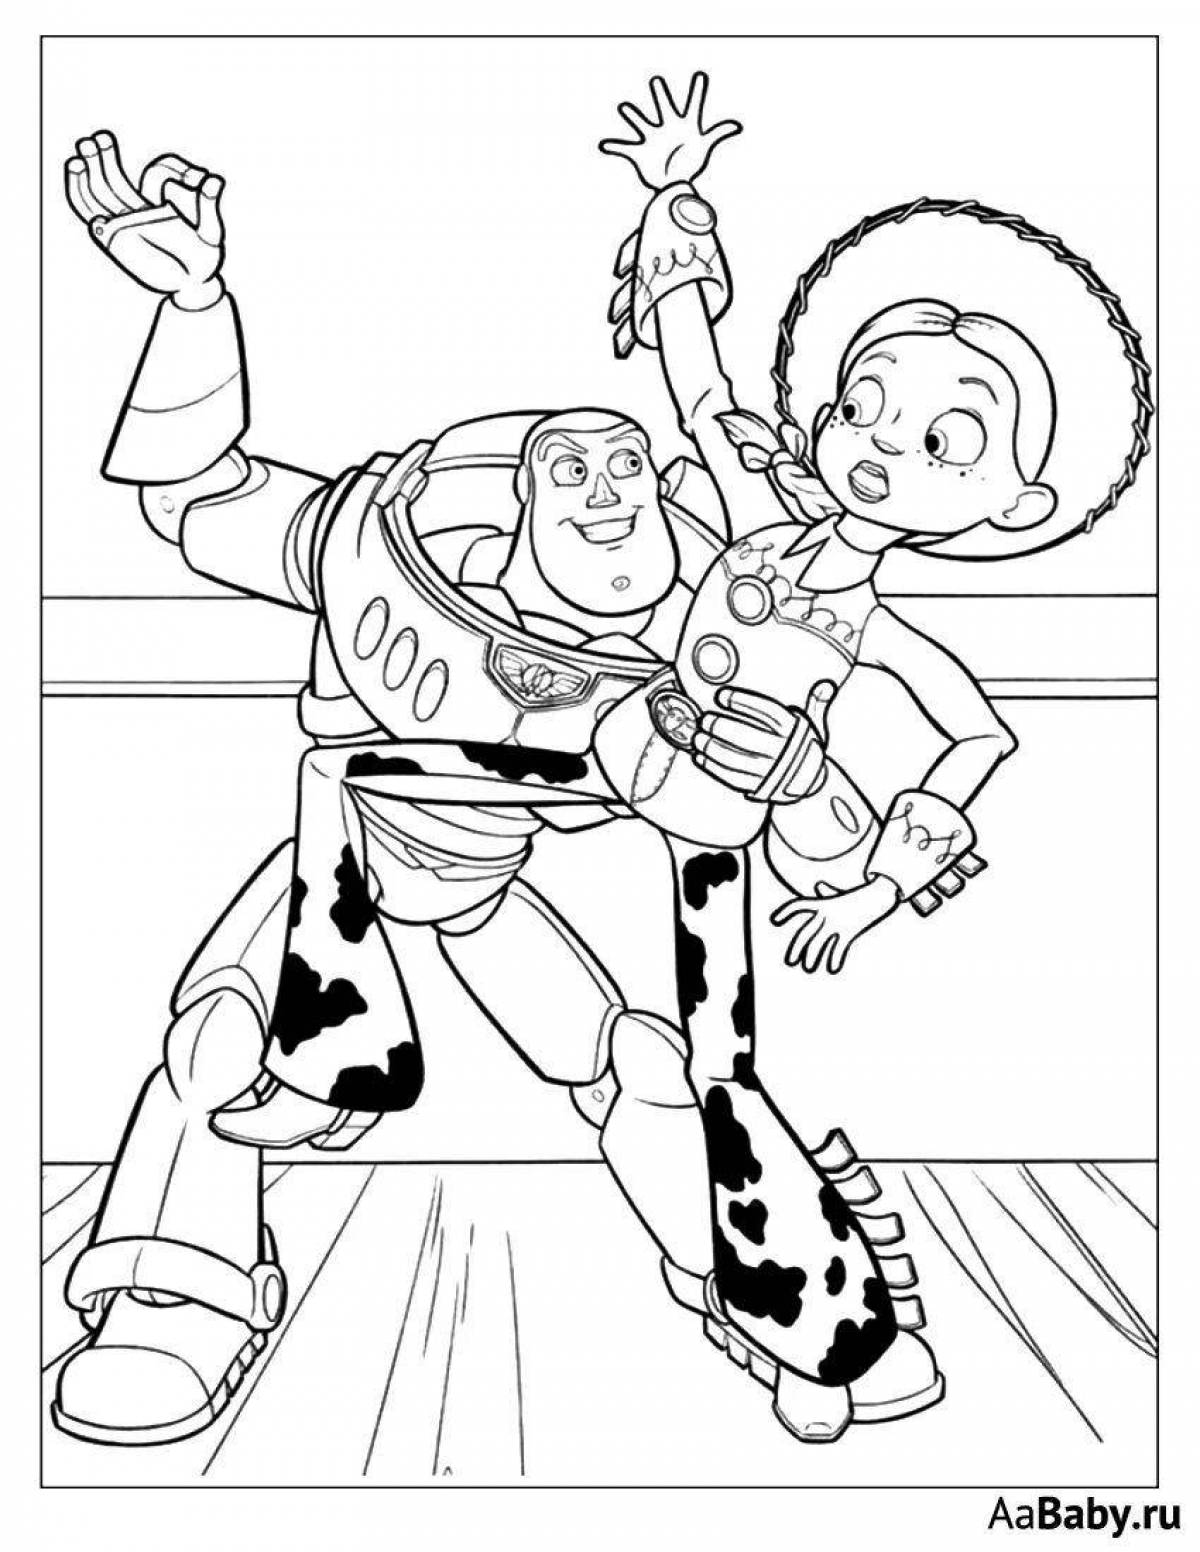 Radiant coloring page buzz